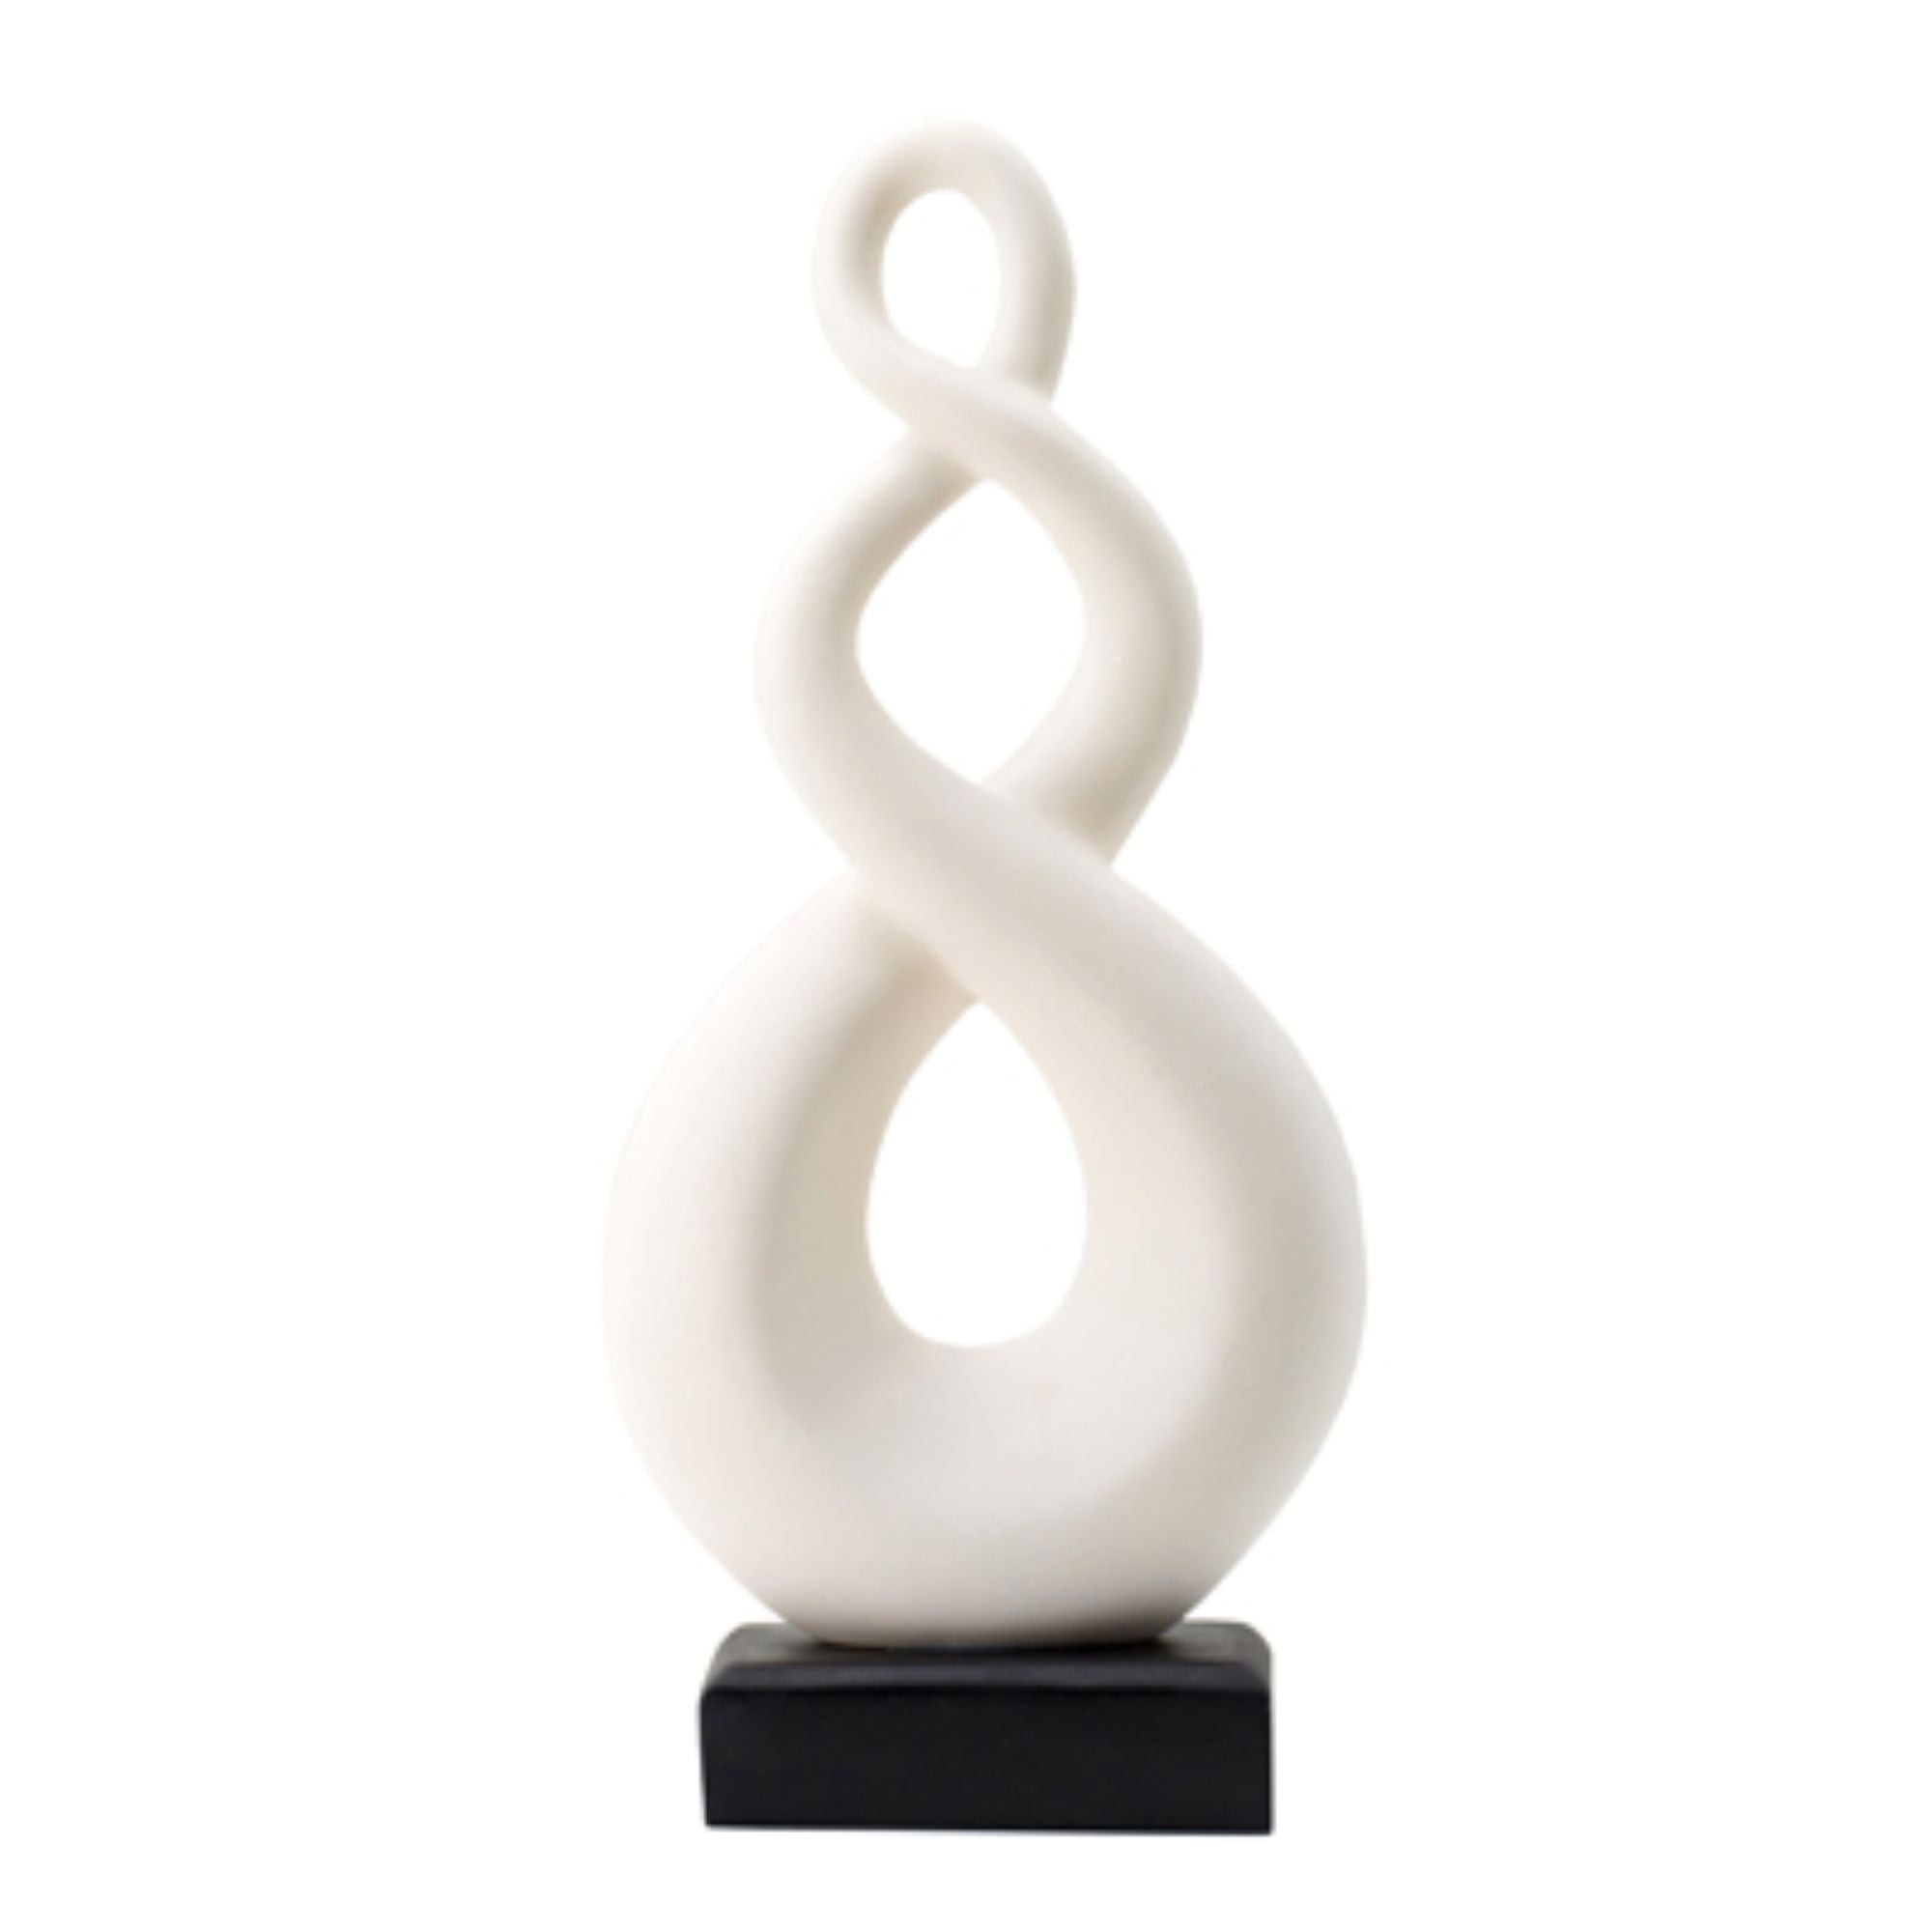 Wrought Studio Palni Abstract Statue, Thinker, White Table top